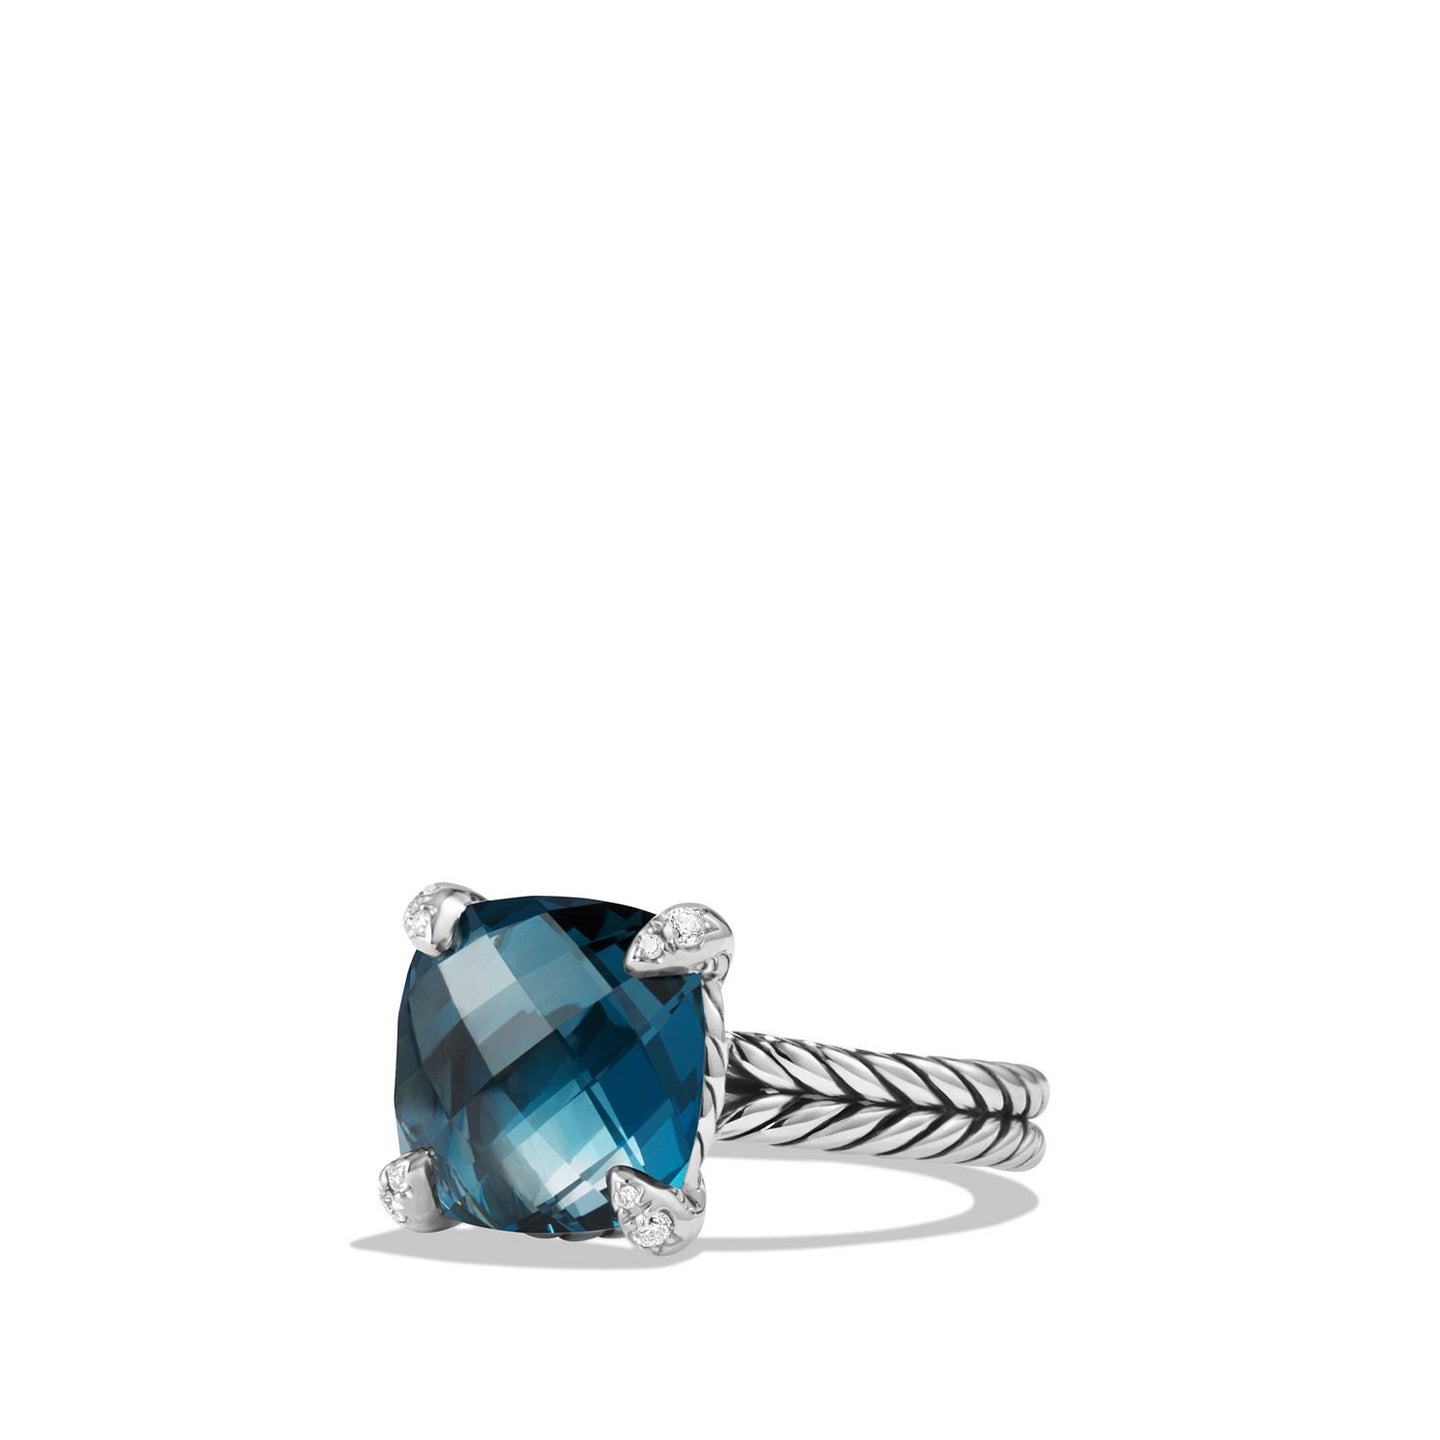 Ring with Hampton Blue Topaz and Diamonds, Size 6.5.